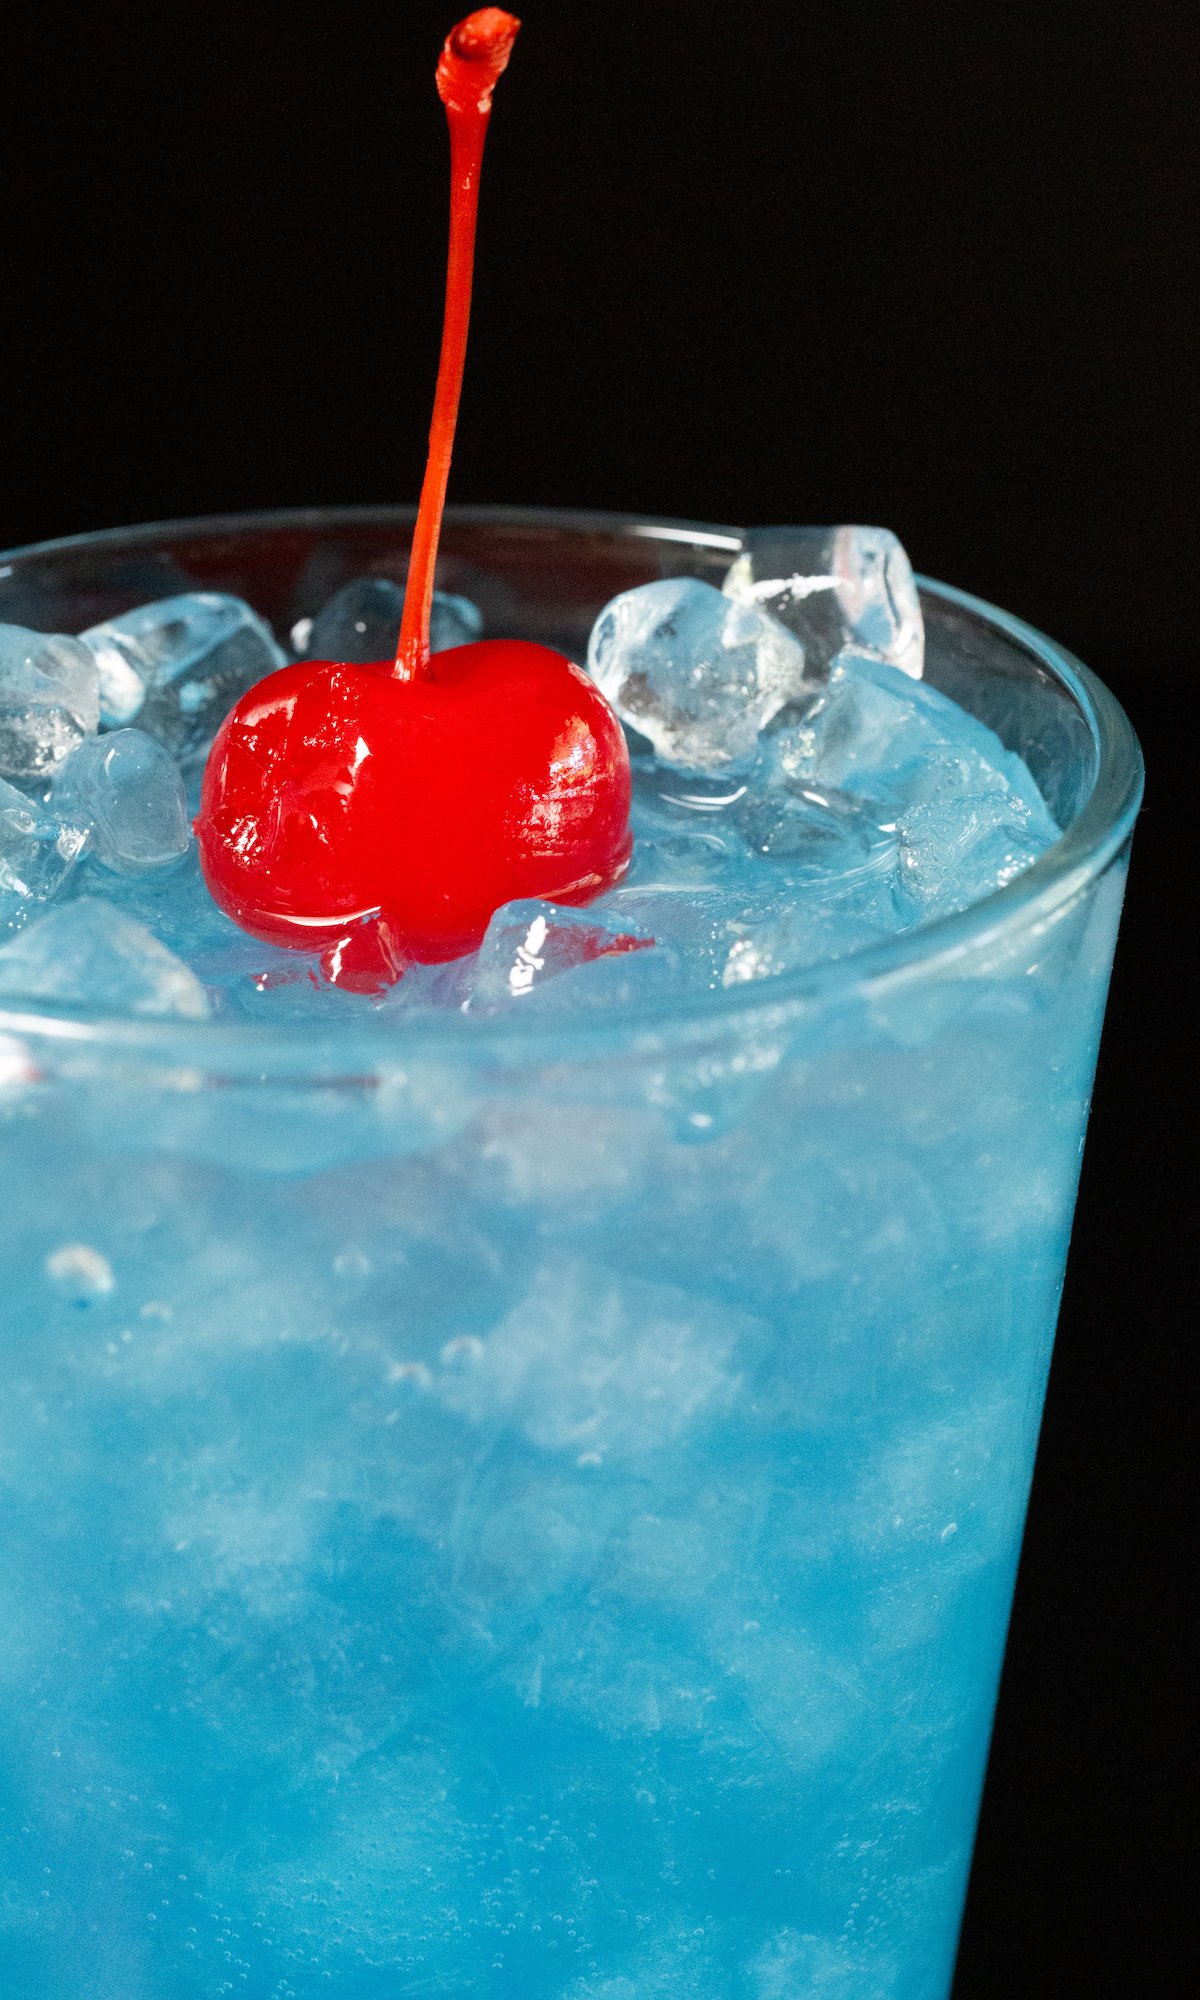 Close up of a glass of ocean water with a cherry on top.